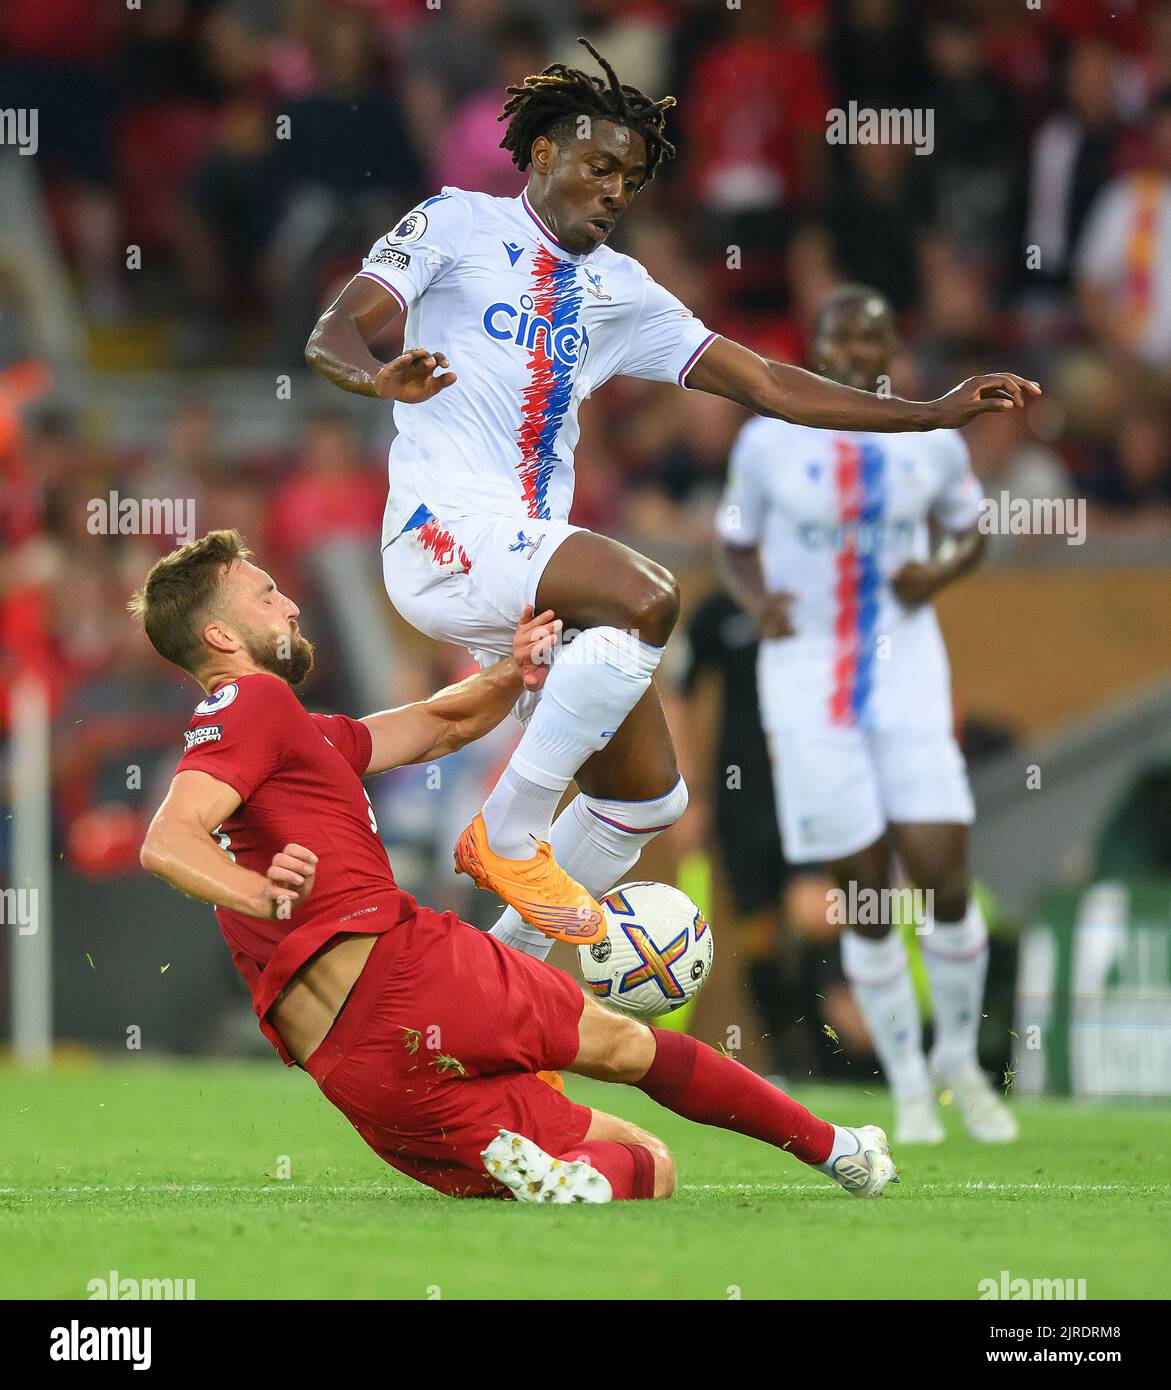 15 Aug 2022 - Liverpool v Crystal Palace - Premier League - Anfield  Crystal Palace's Eberichi Eze tackled by Nat Phillips during the Premier League match at Anfield.  Picture : Mark Pain / Alamy Live News Stock Photo